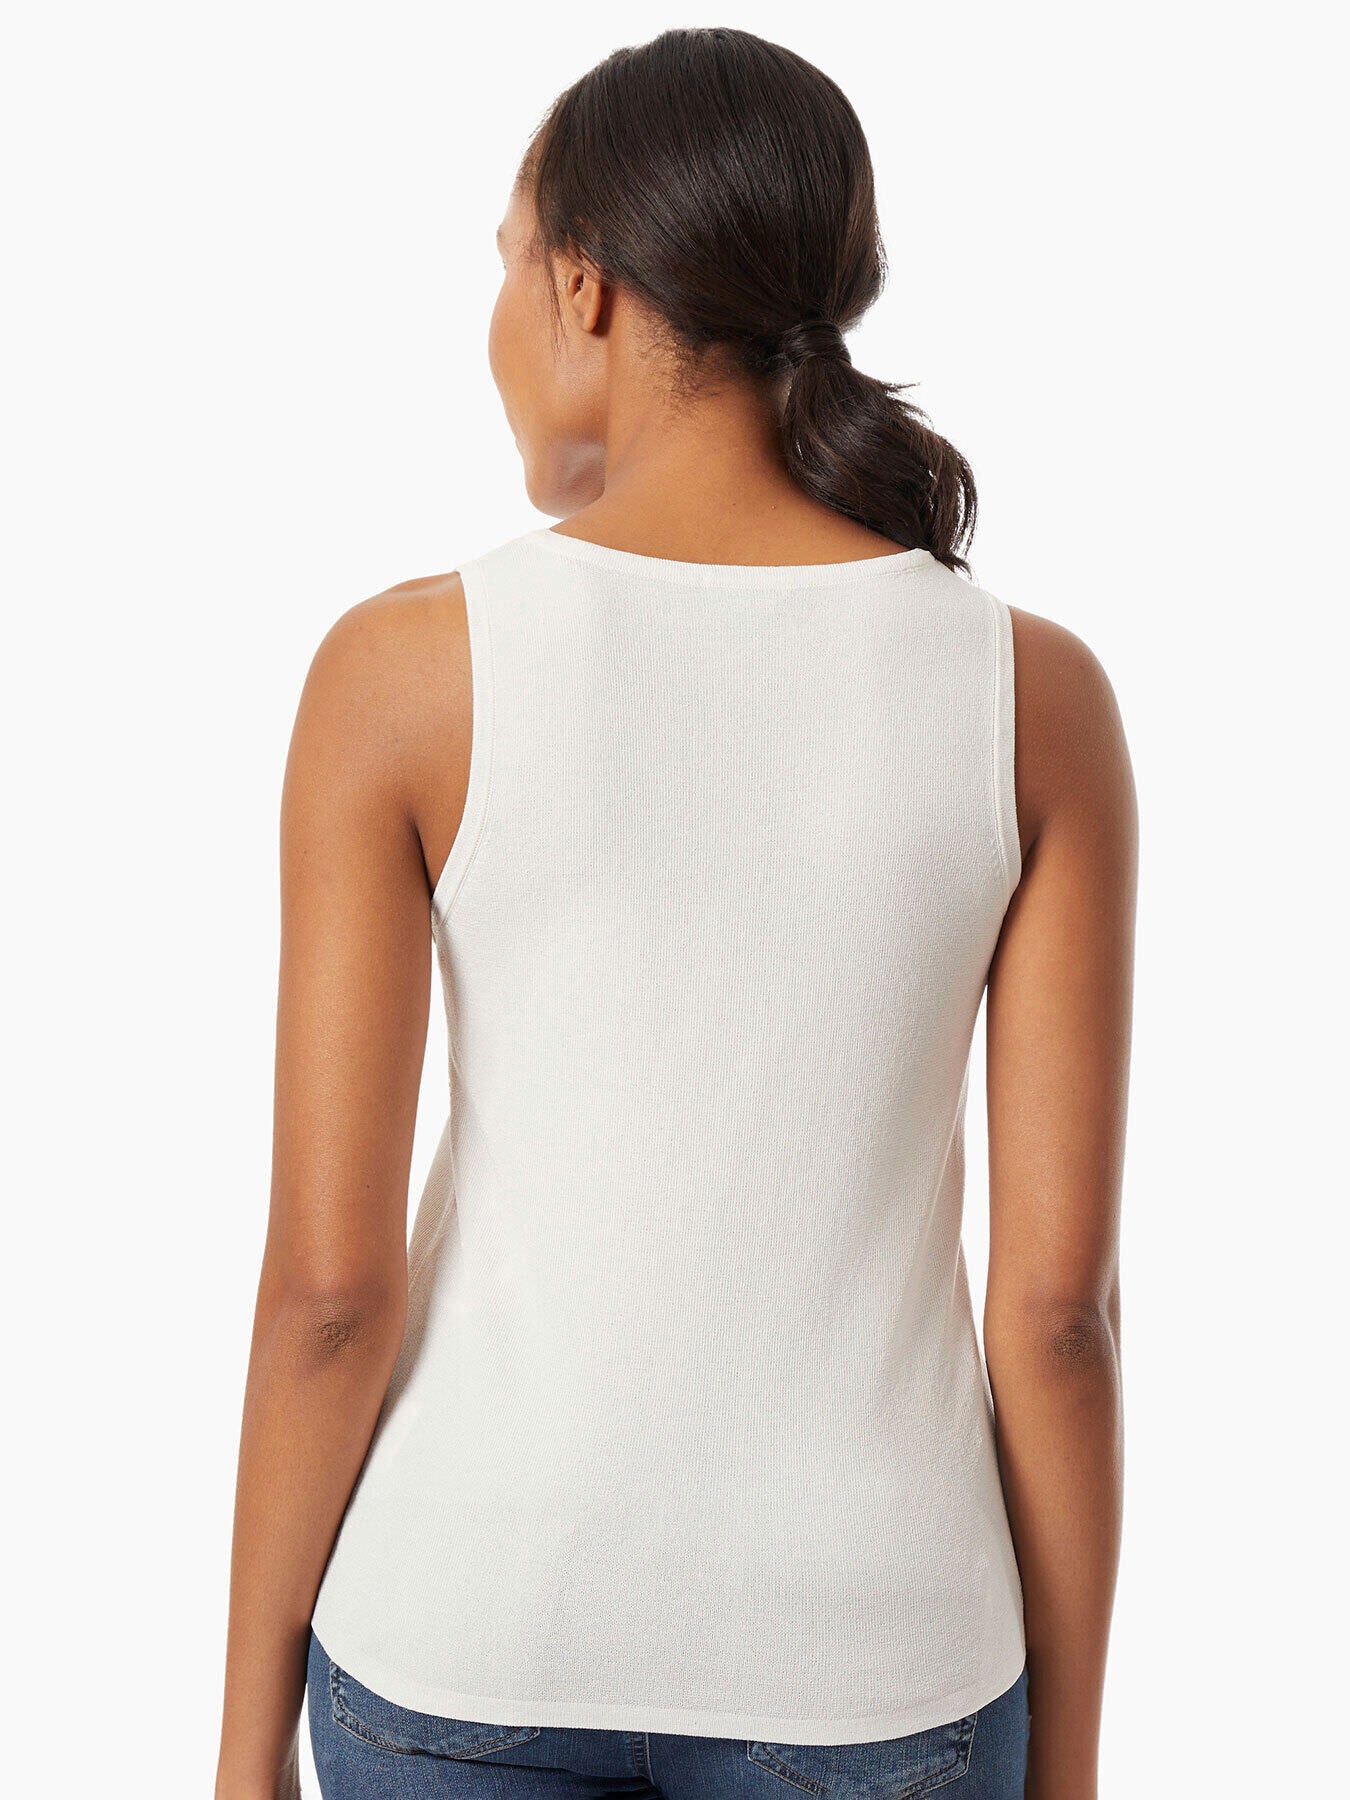 Scoop Neck Tank Top - White Knit Top